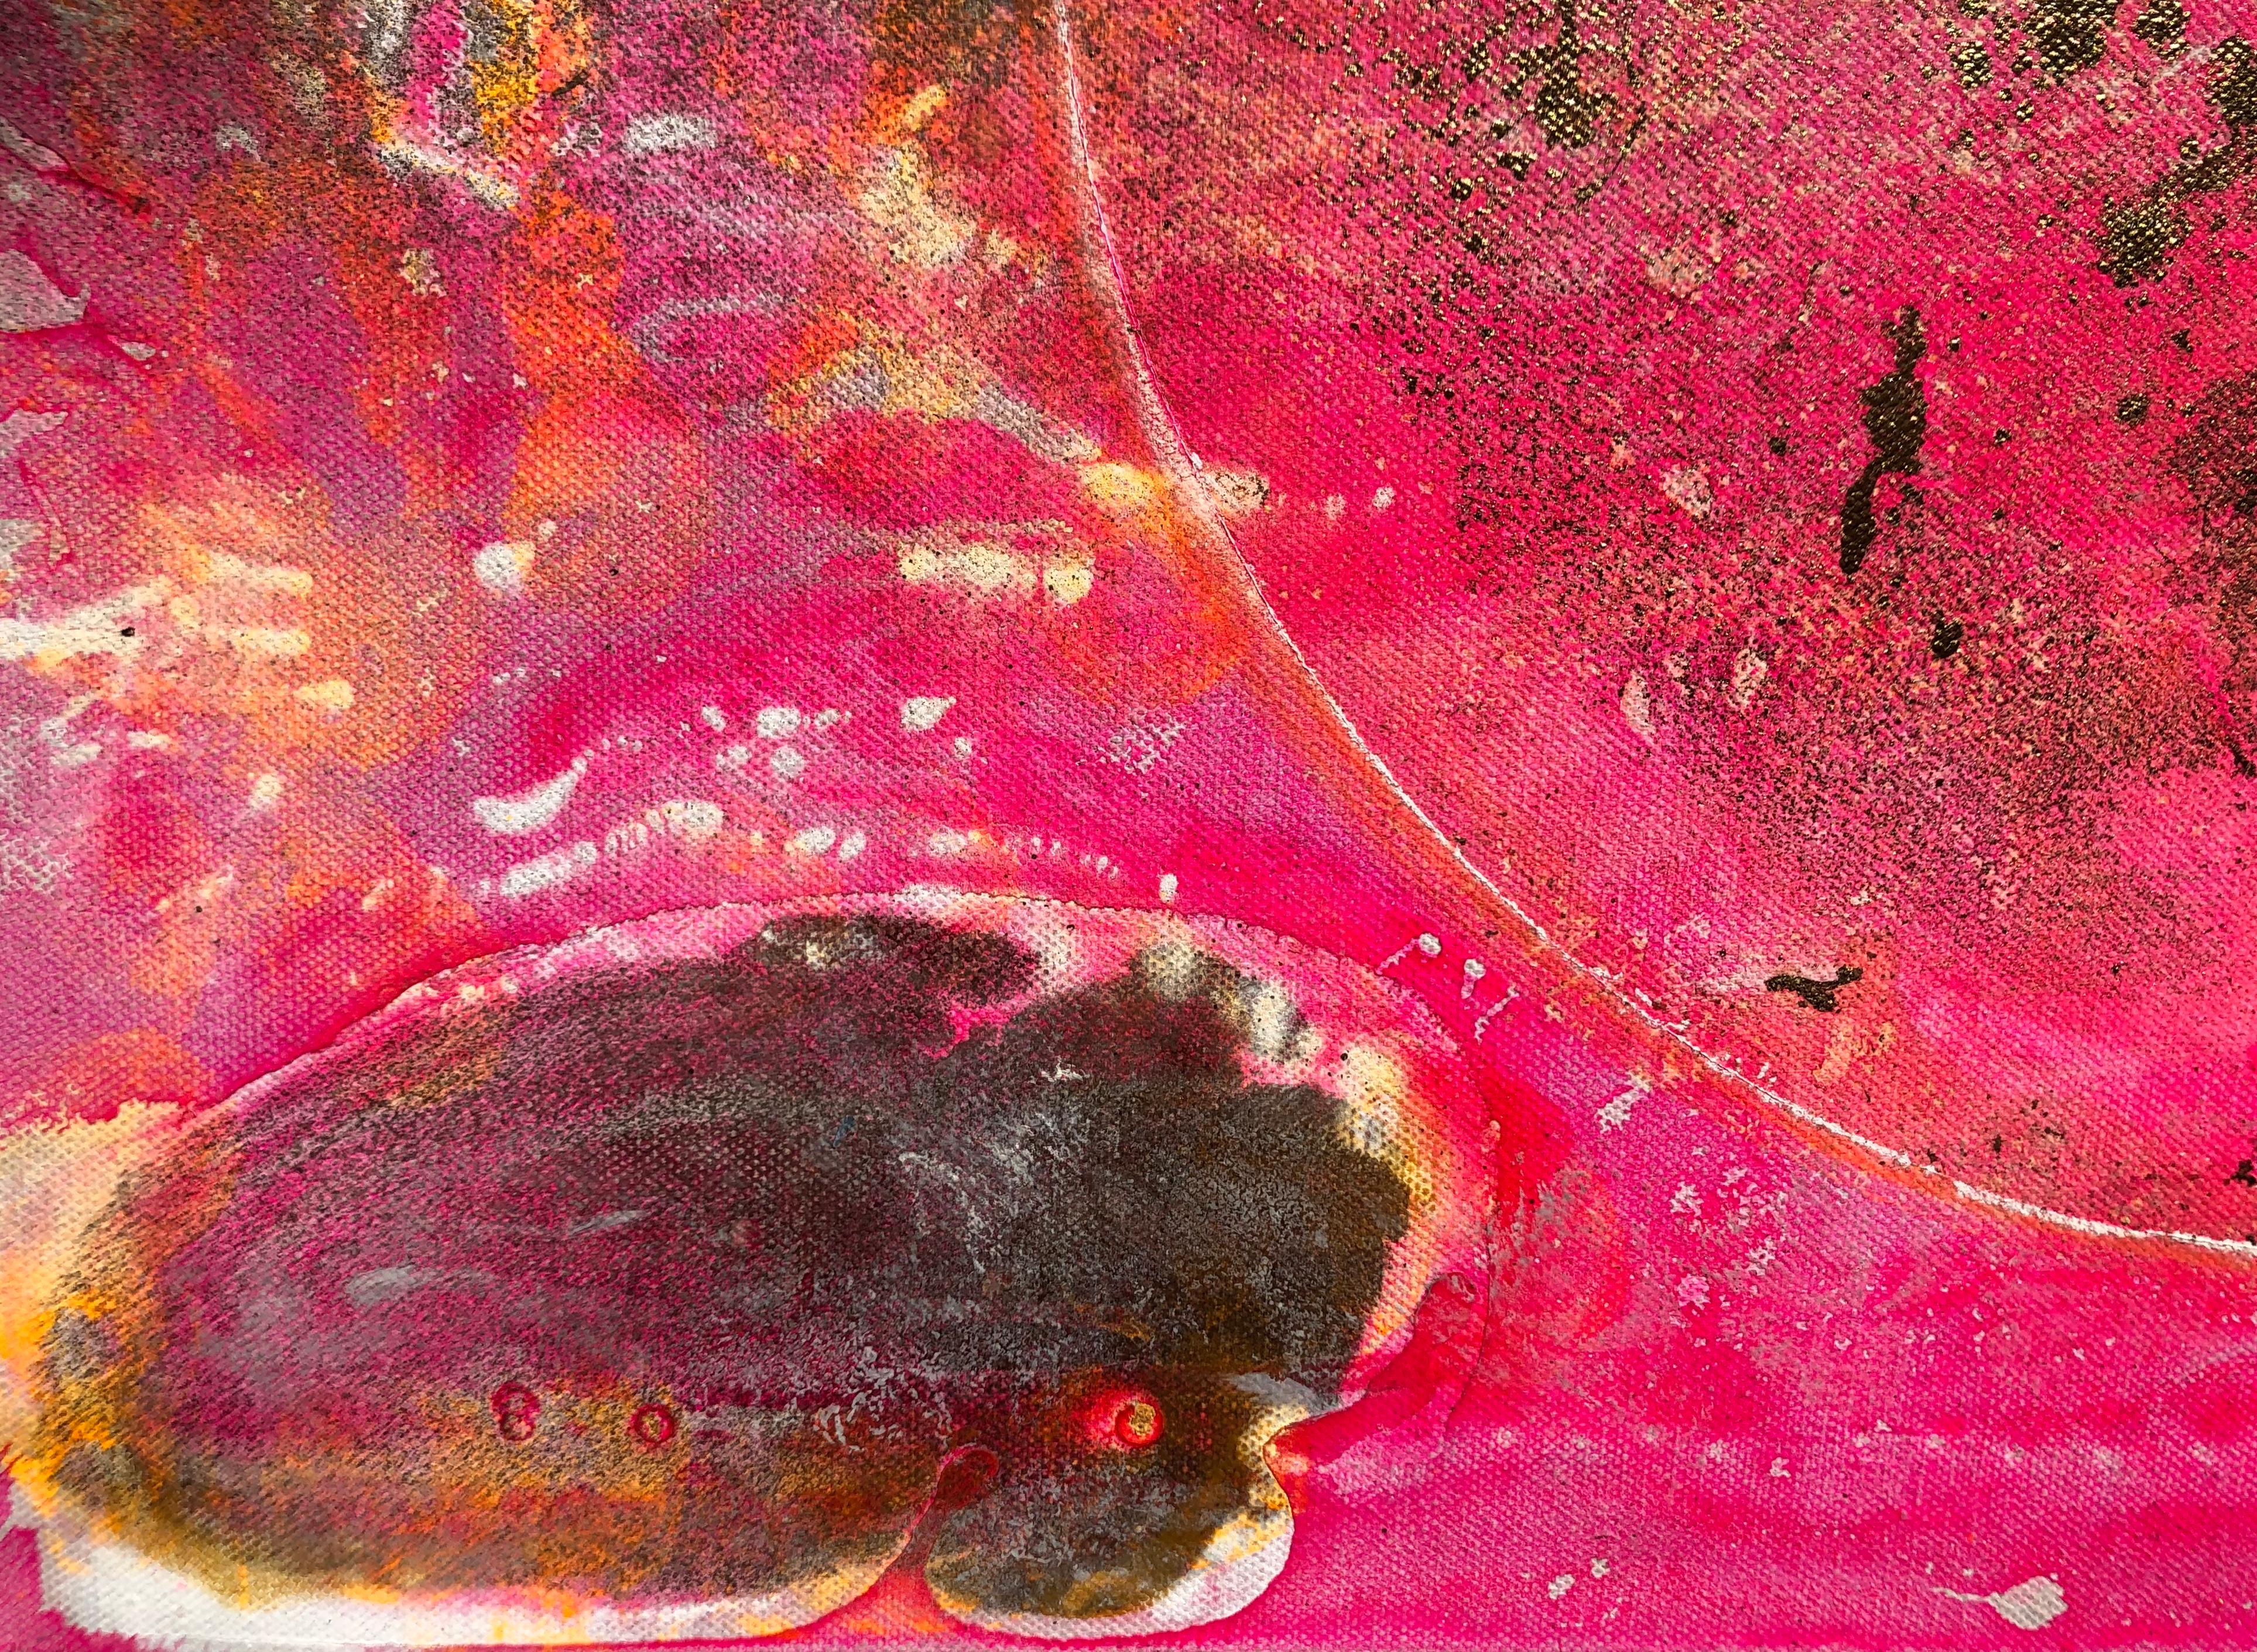 Morning levitation 2 - Painting on canvas, abstract metaphysical, gold, pink im Angebot 9